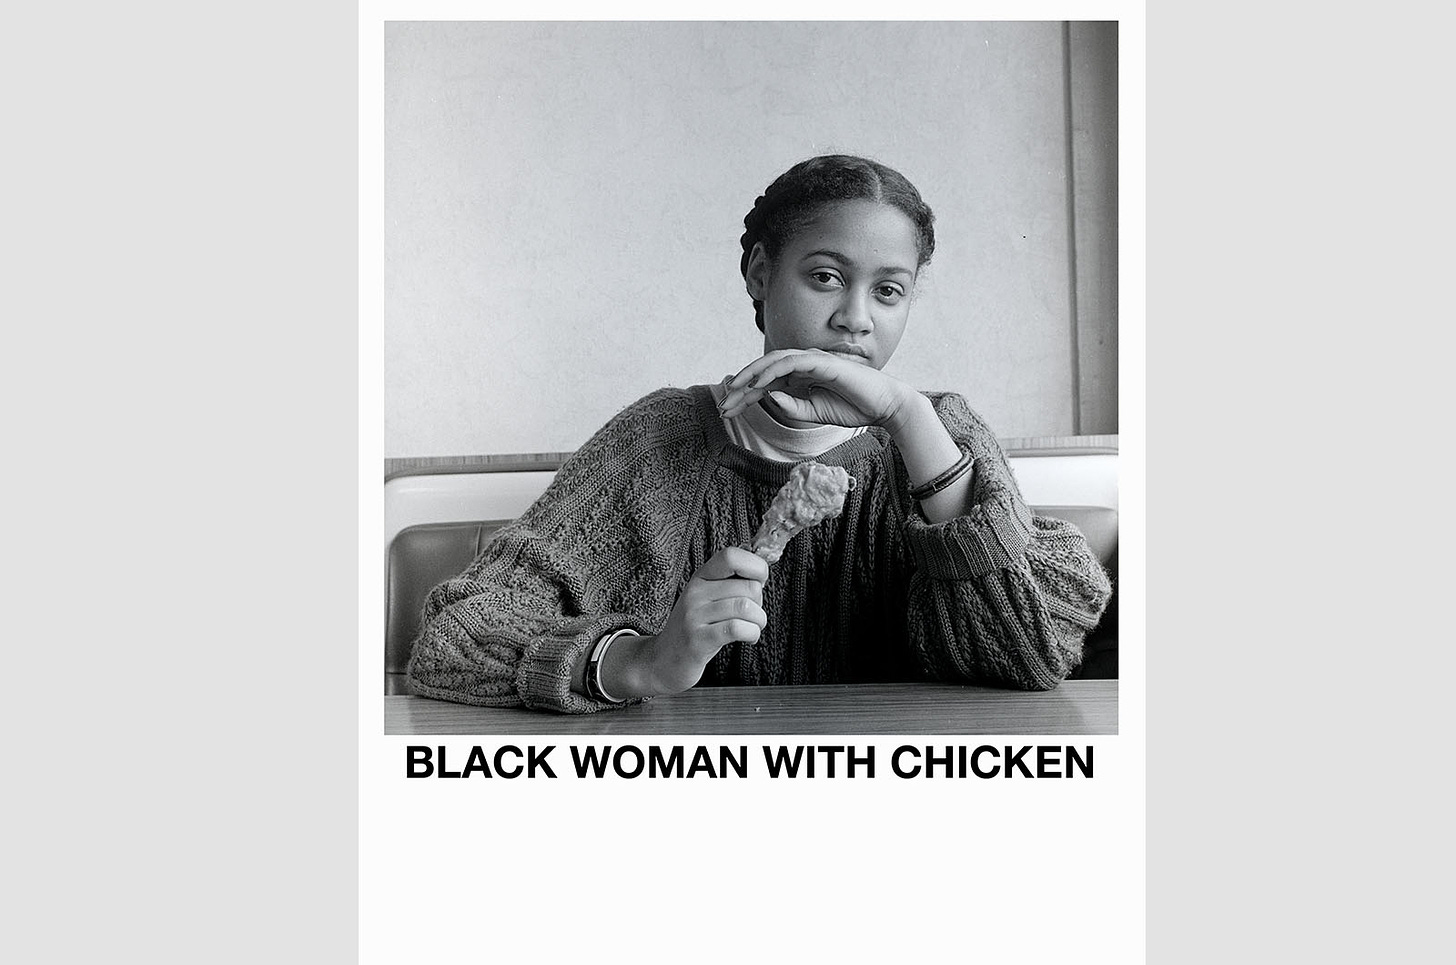 Carrie Mae Weems, Black Woman with Chicken